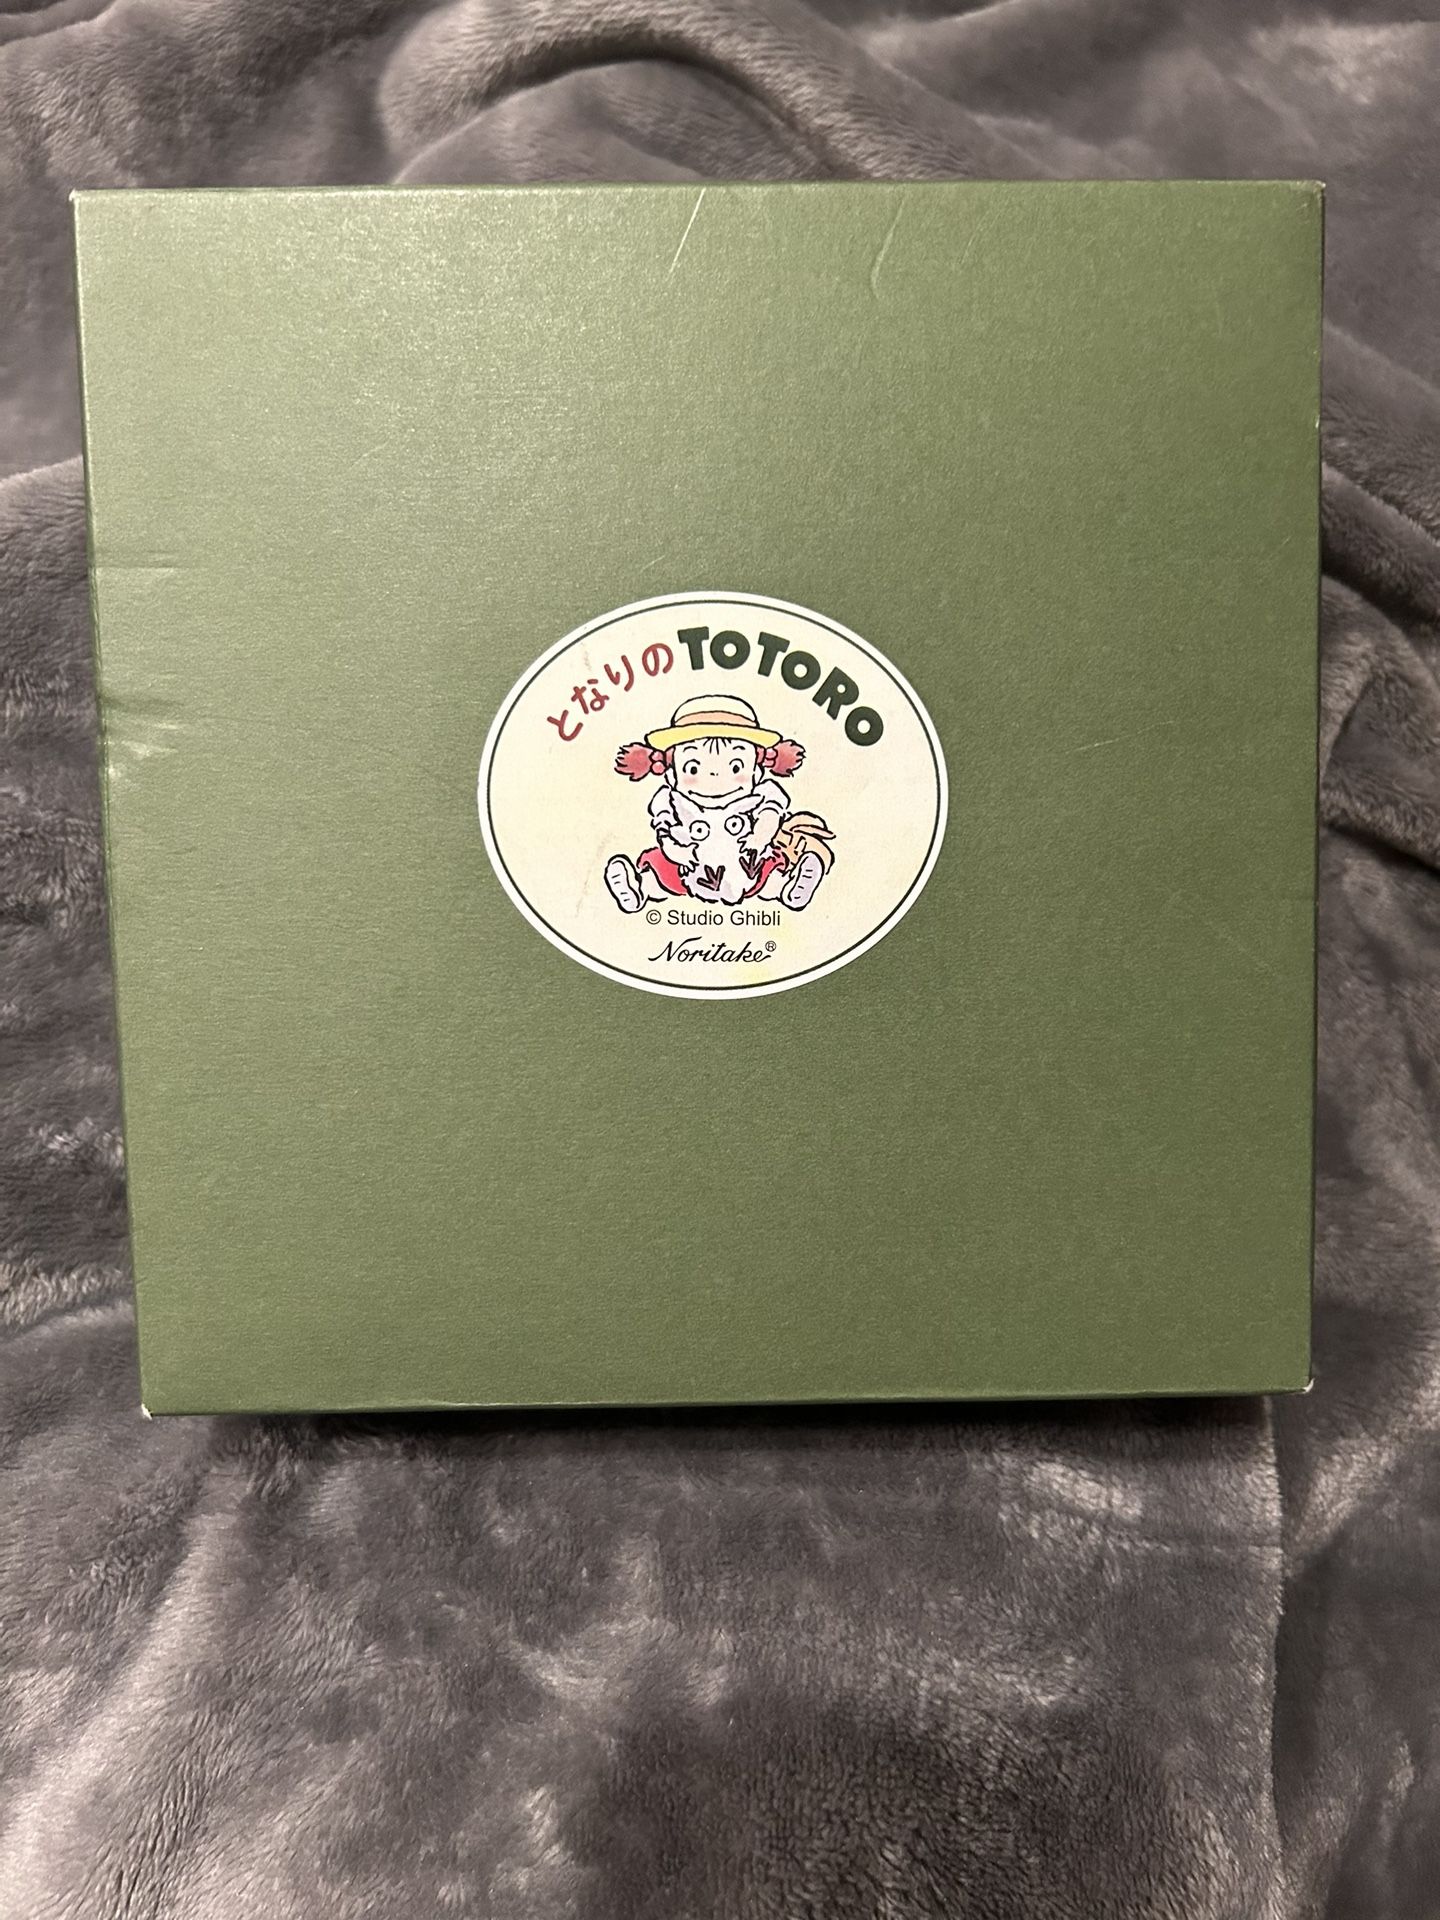 My Neighbor Totoro Mug - Official Licensed.  New In Box